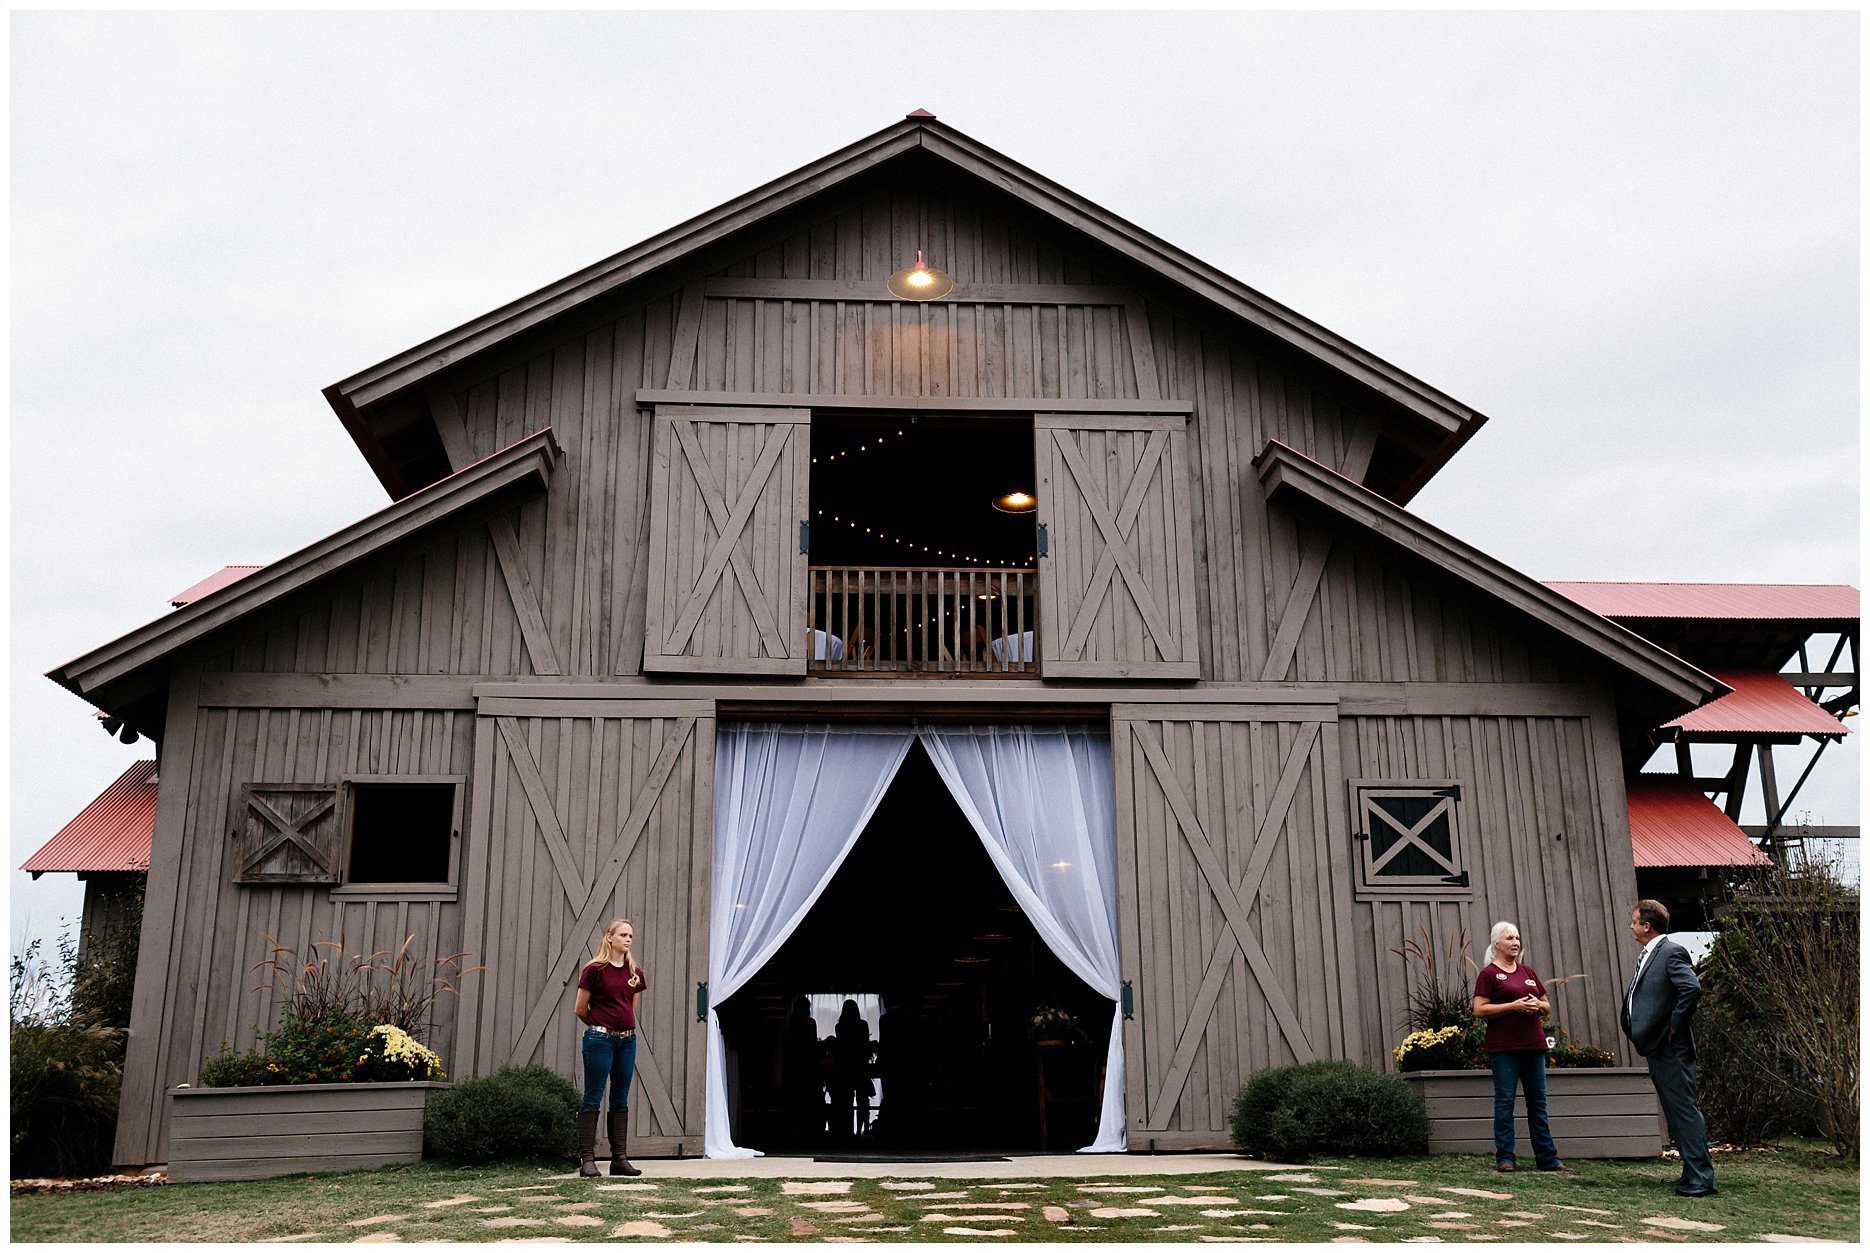 Alabama Wedding at the Stables at Russell Crossroads by Amy Little Photography